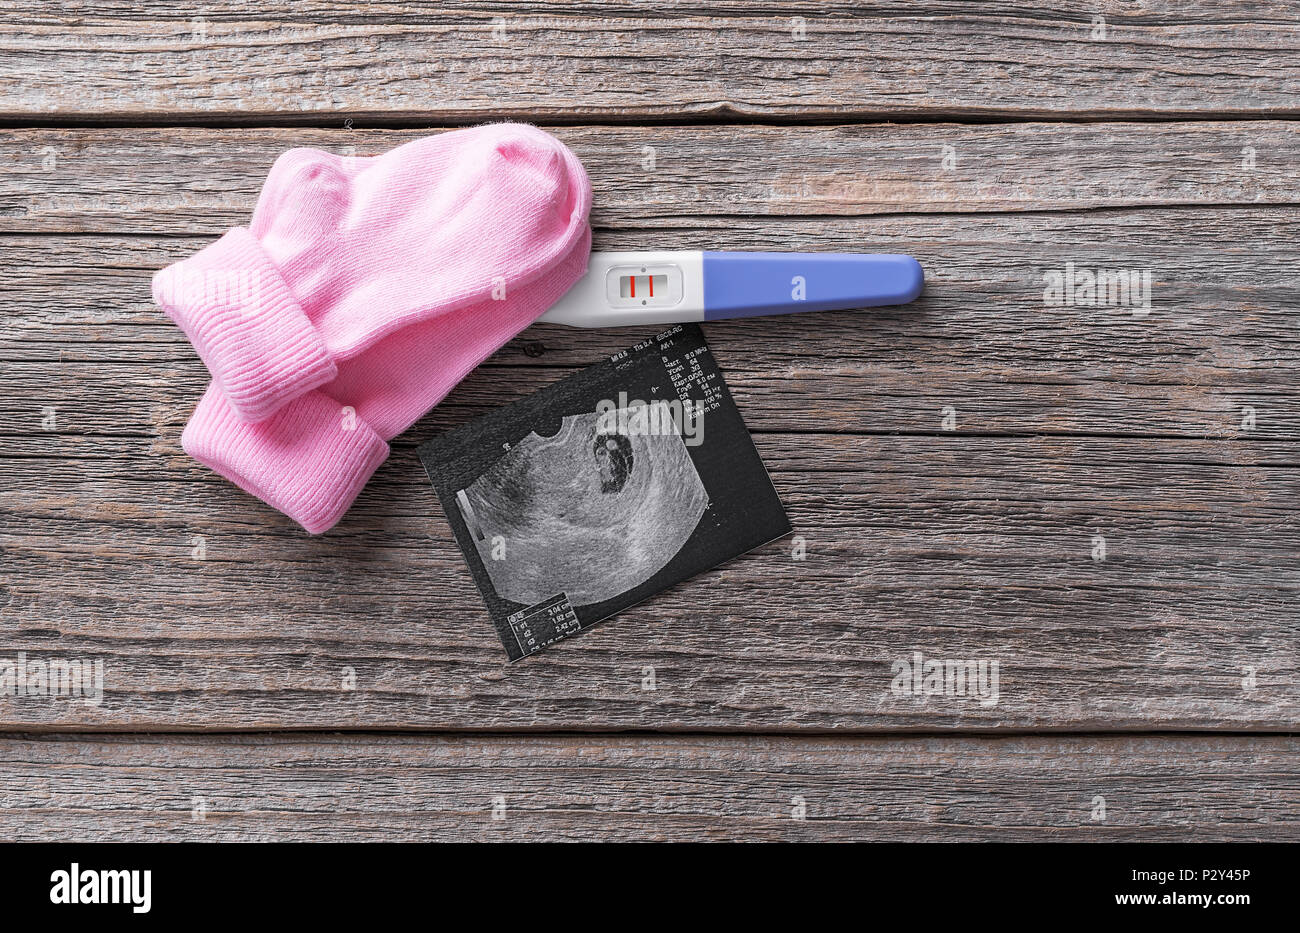 Pregnancy test and baby socks picture of the embryo. Stock Photo